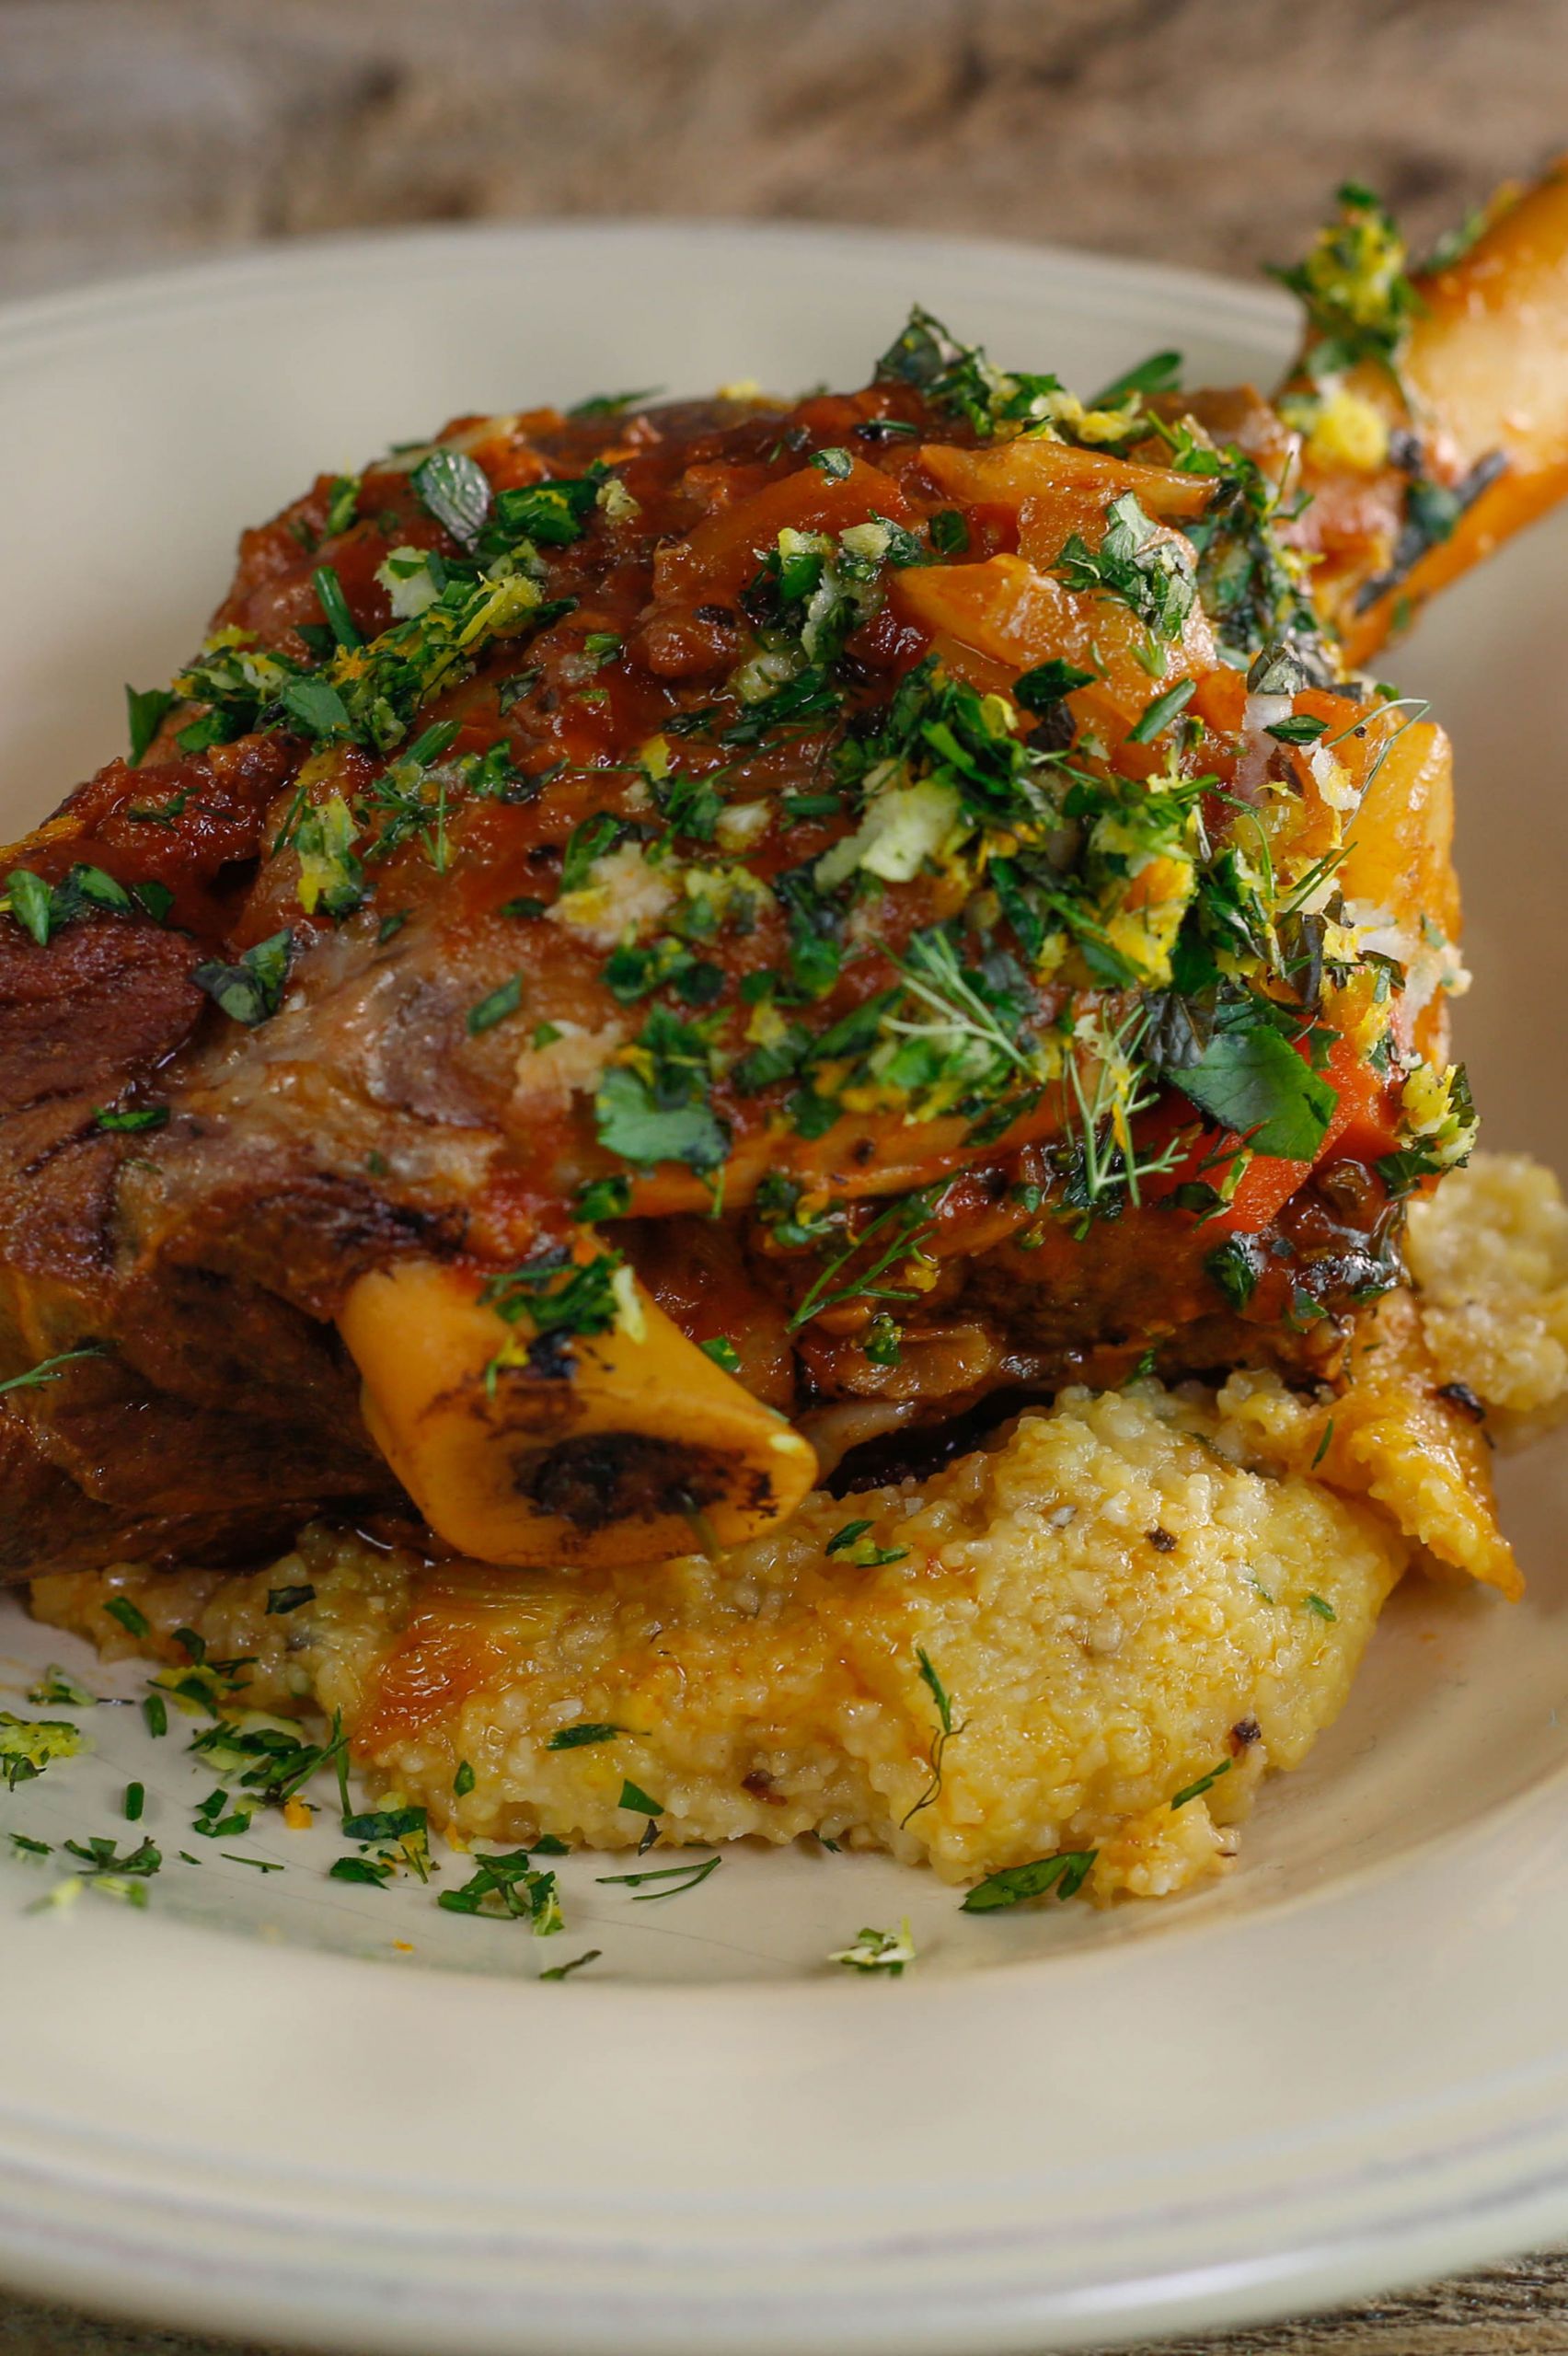 Rachael Ray Easter Dinner Menu
 9 Rich and Flavorful Entrees for Your Easter Table